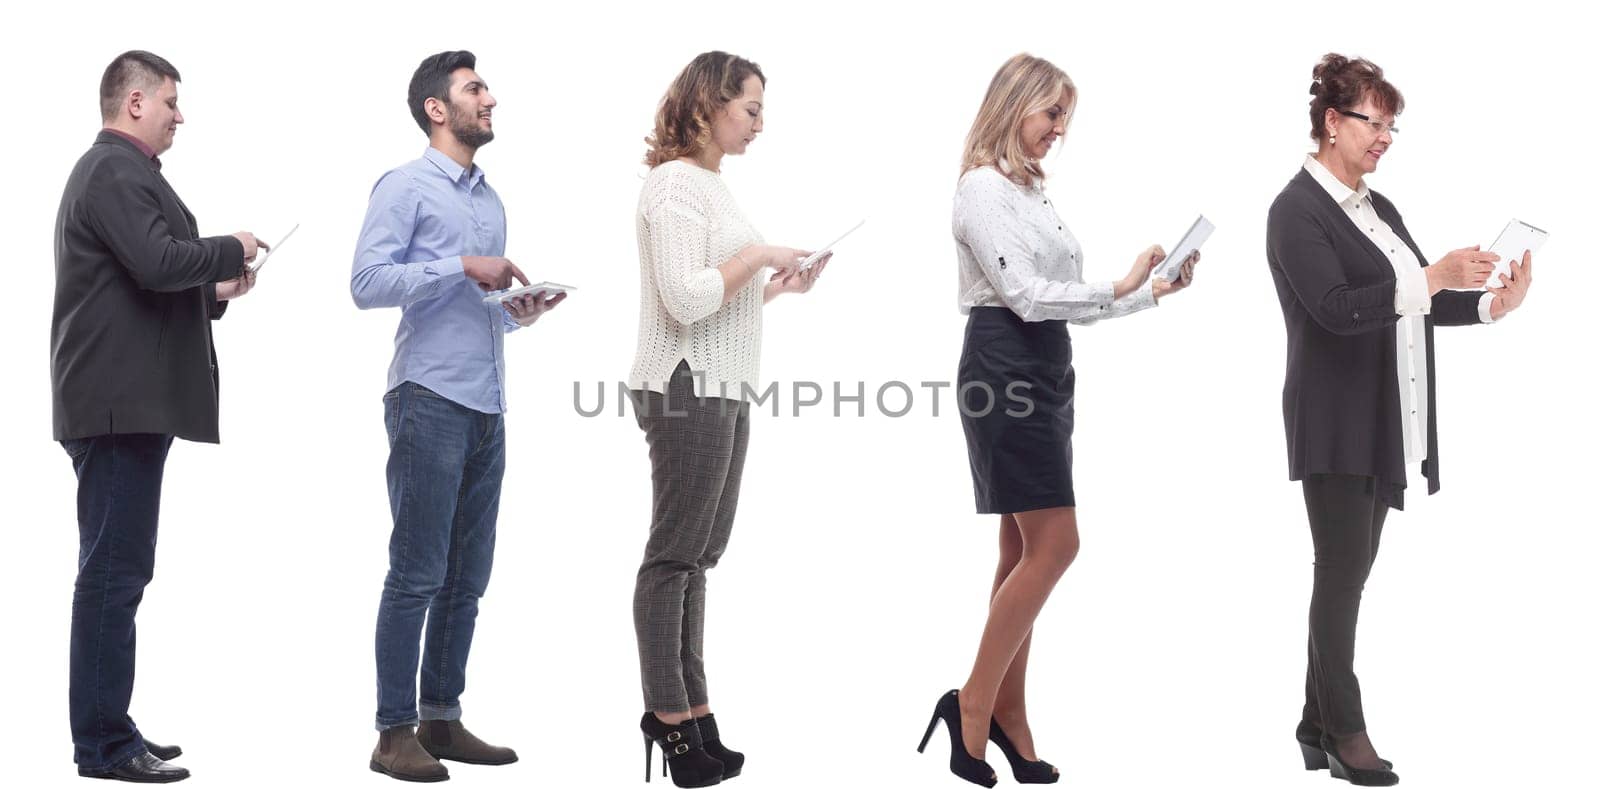 group of people holding tablet and looking ahead by asdf